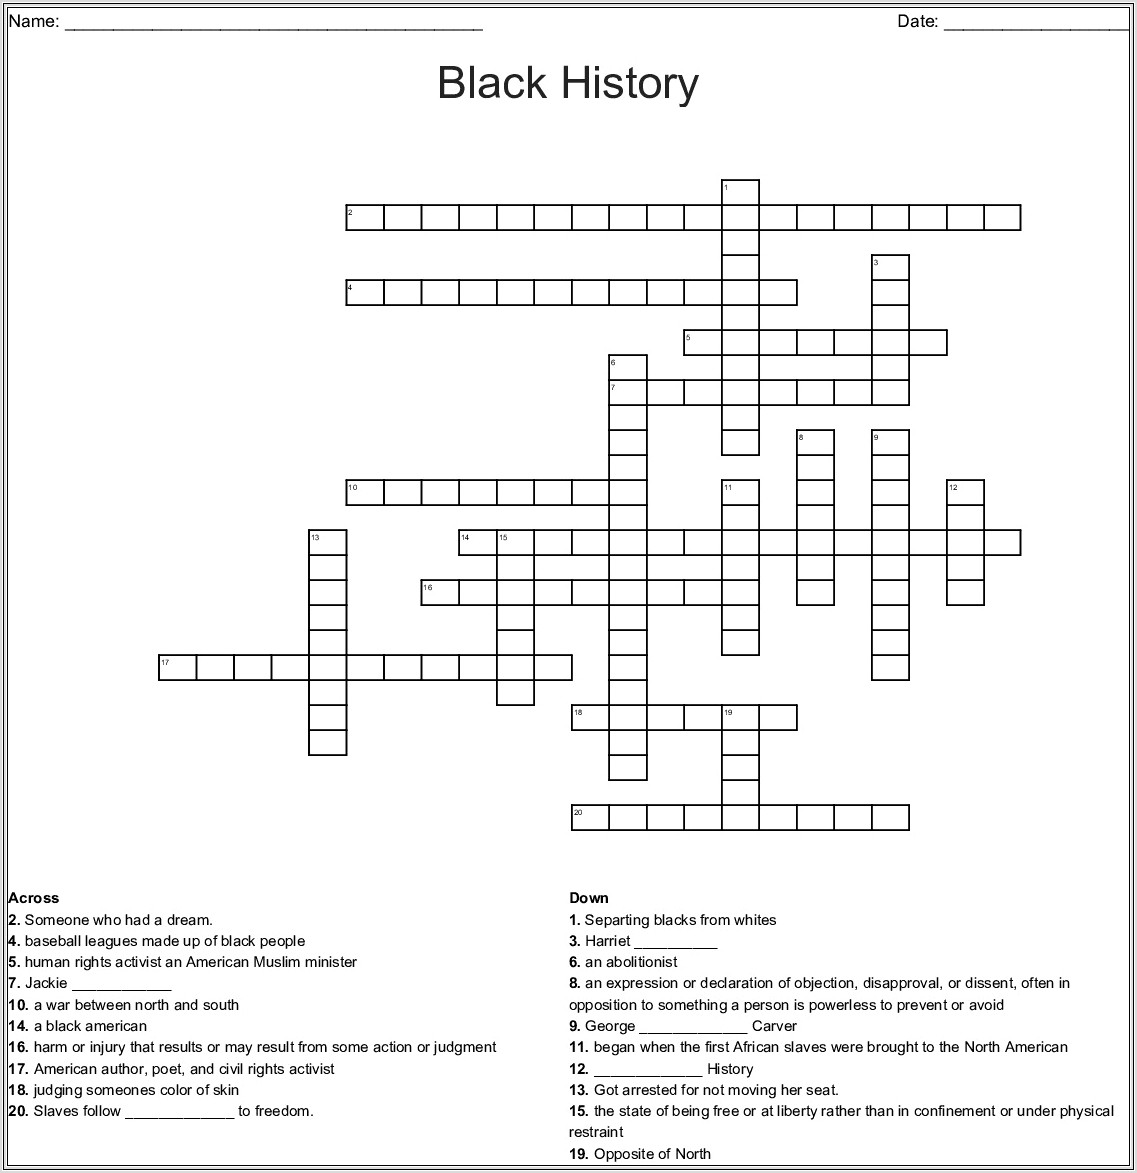 Black History Month Crossword Puzzle Worksheet Answers